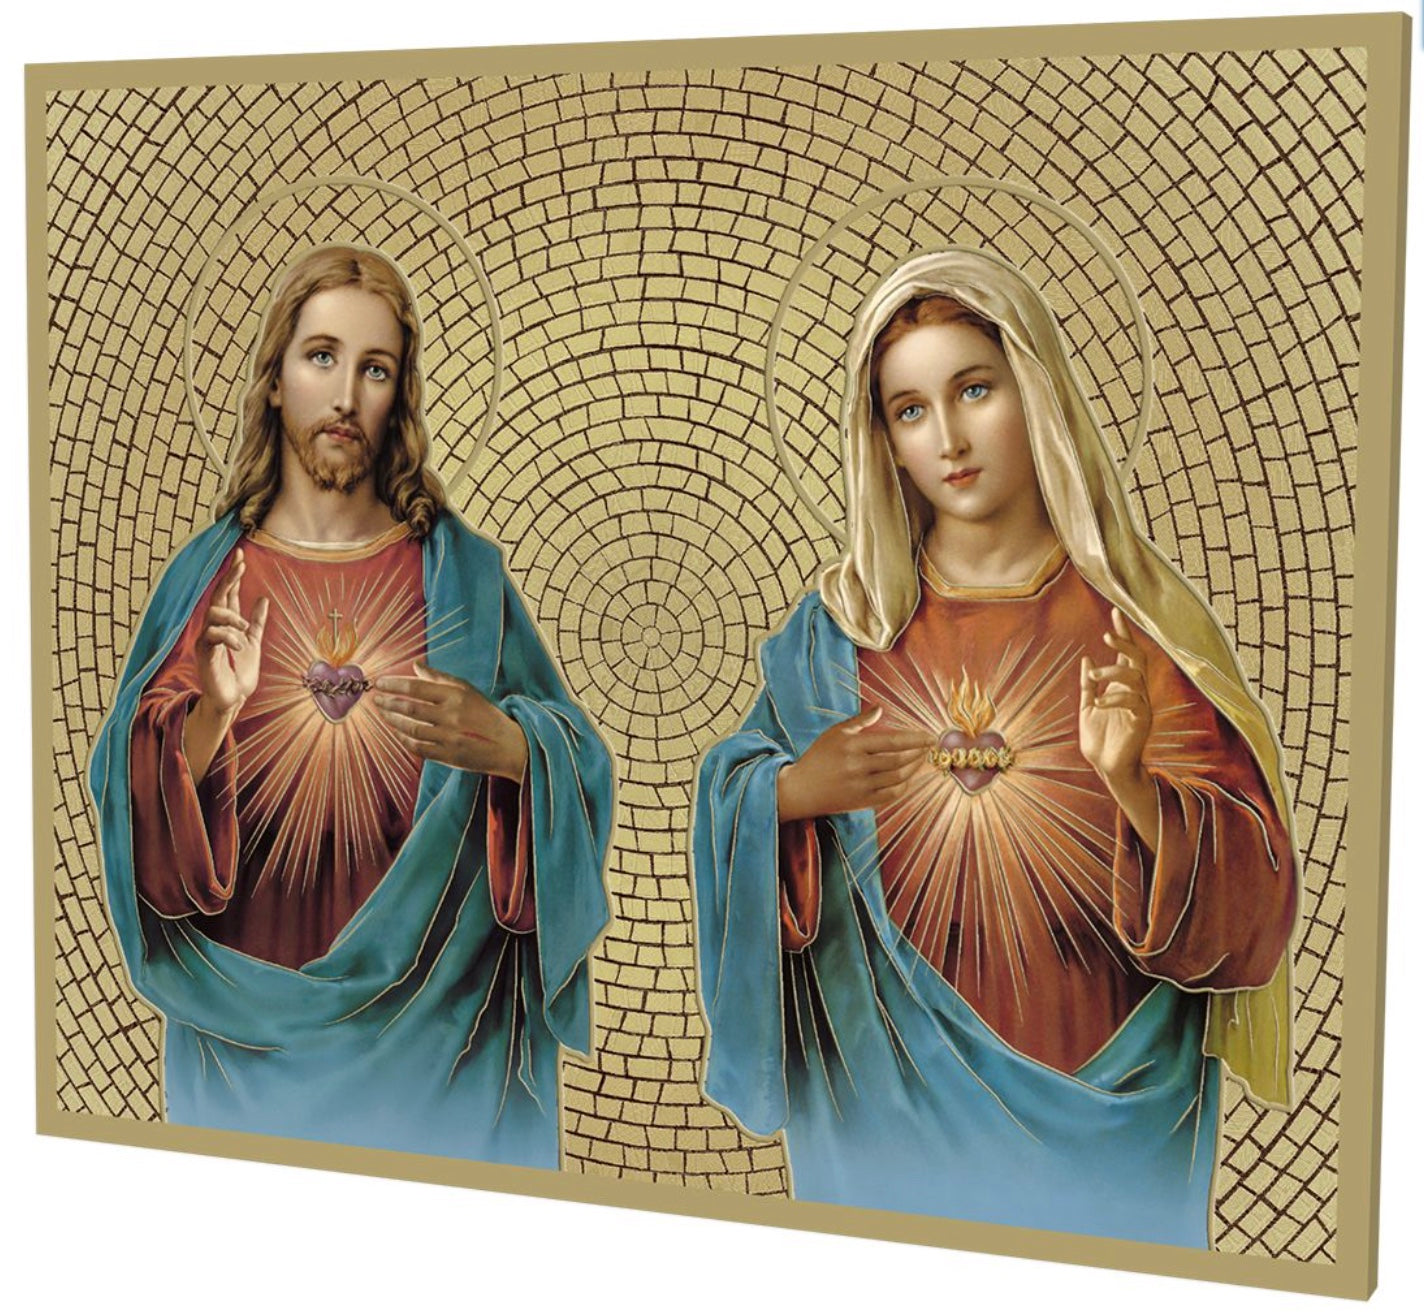 8" x 10" Gold Foil Mosaic Plaque of The Sacred Hearts